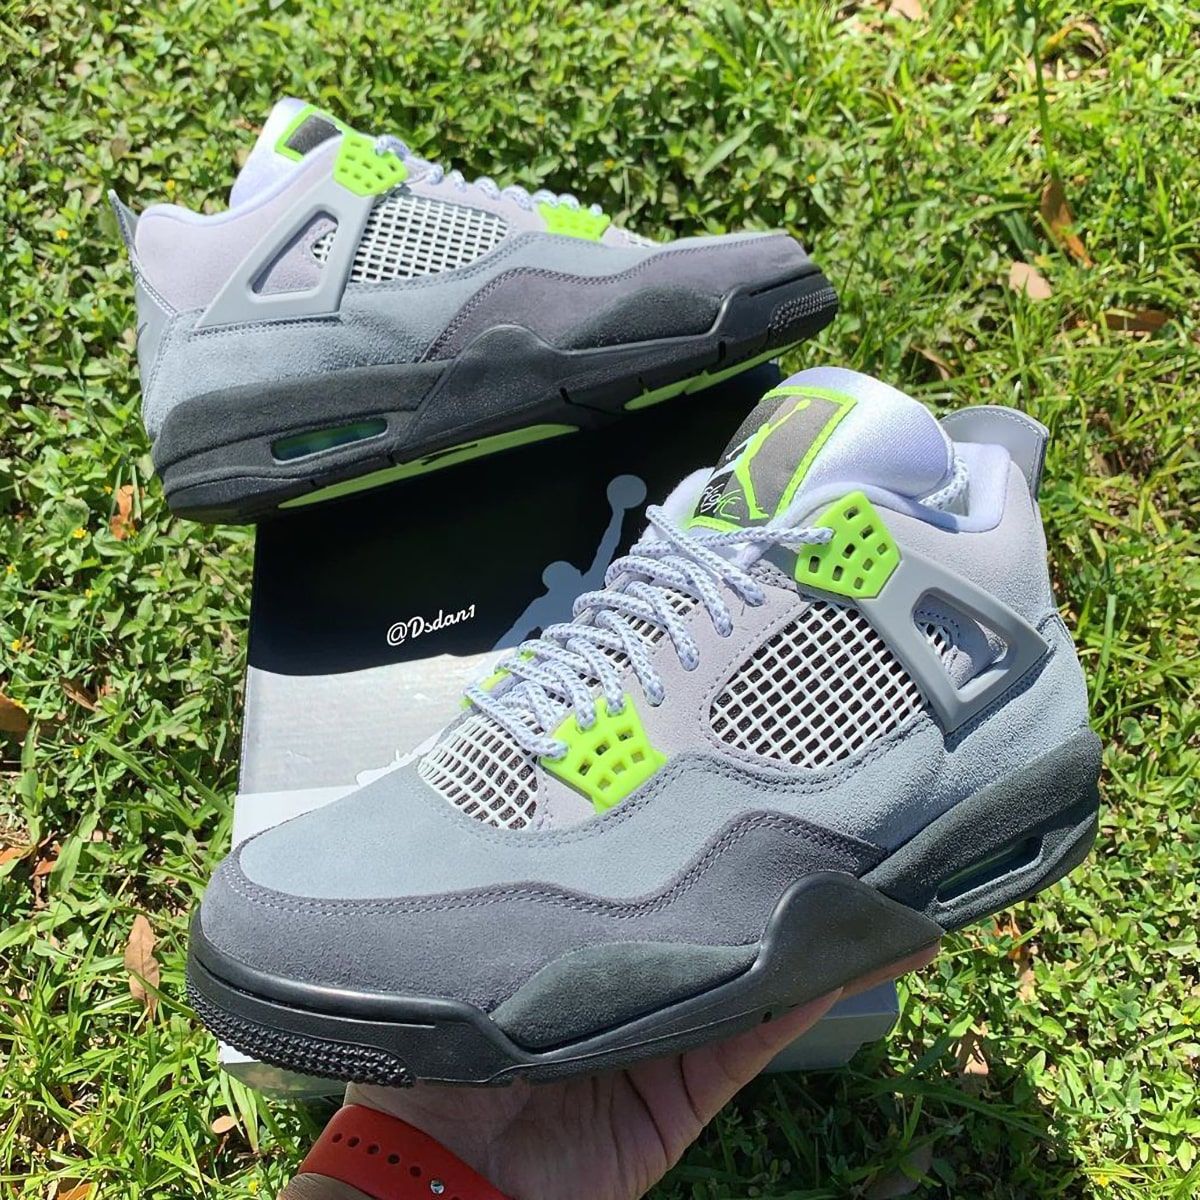 lime green grey 4s